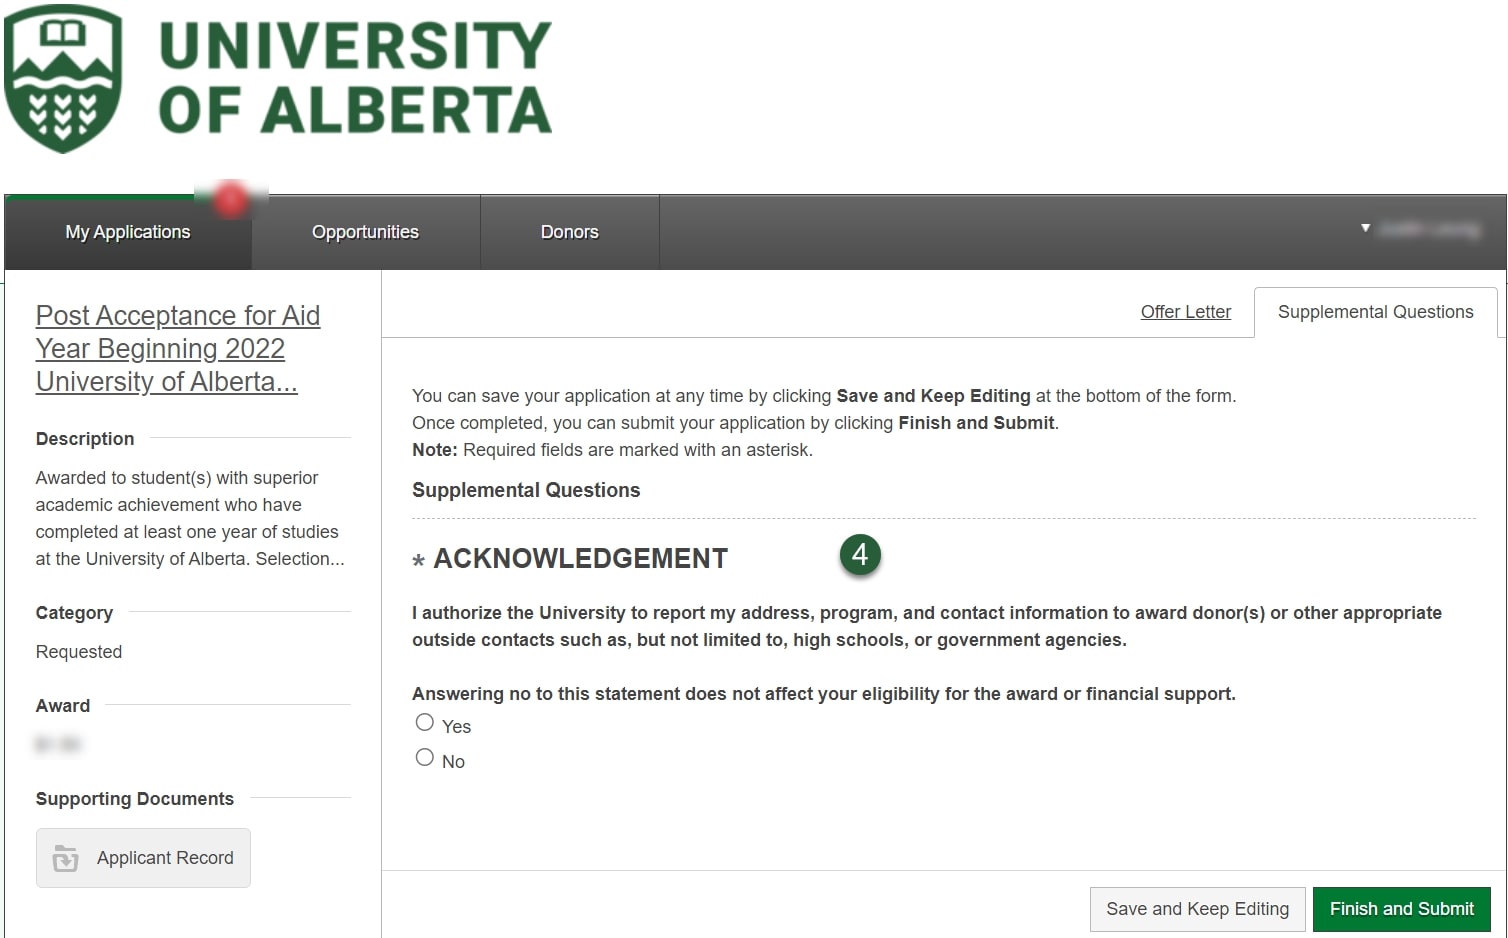 After selecting to accept the offer, the Post Acceptance Acknowledgement page will be displayed. You must review the acknowledgment and select either Yes or No. Answering no to the statement will not affect your eligibility for the award you have been offered, however you must complete this in order for the funds to be disbursed to your account. Once completed, please select the “Finish and Submit” button in order to complete the post acceptance requirement.